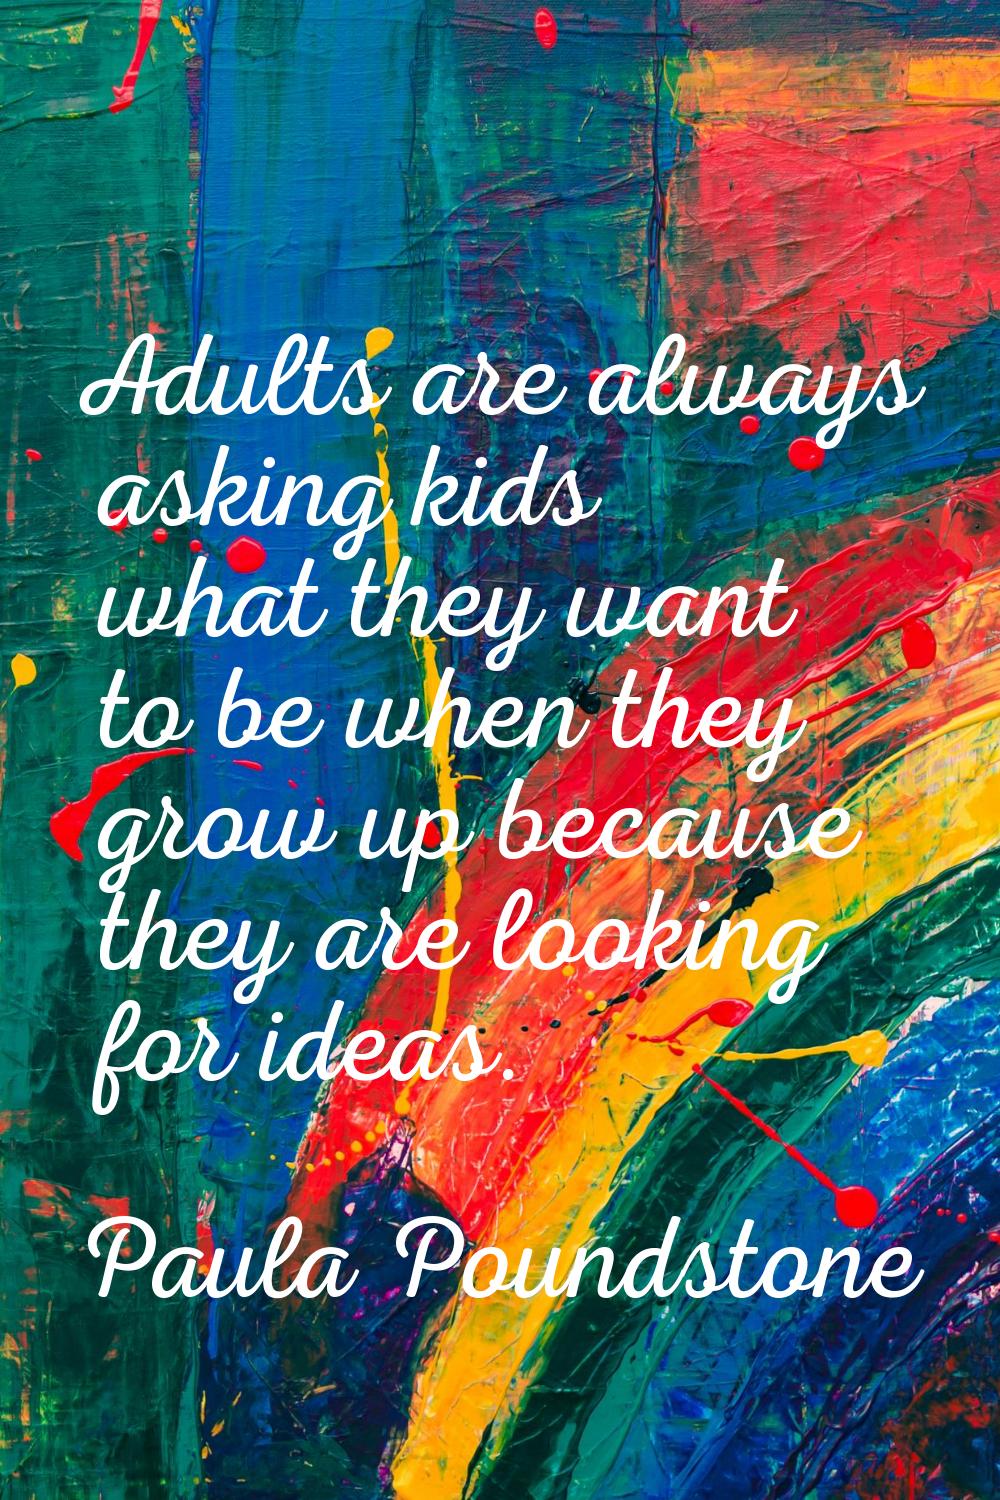 Adults are always asking kids what they want to be when they grow up because they are looking for i